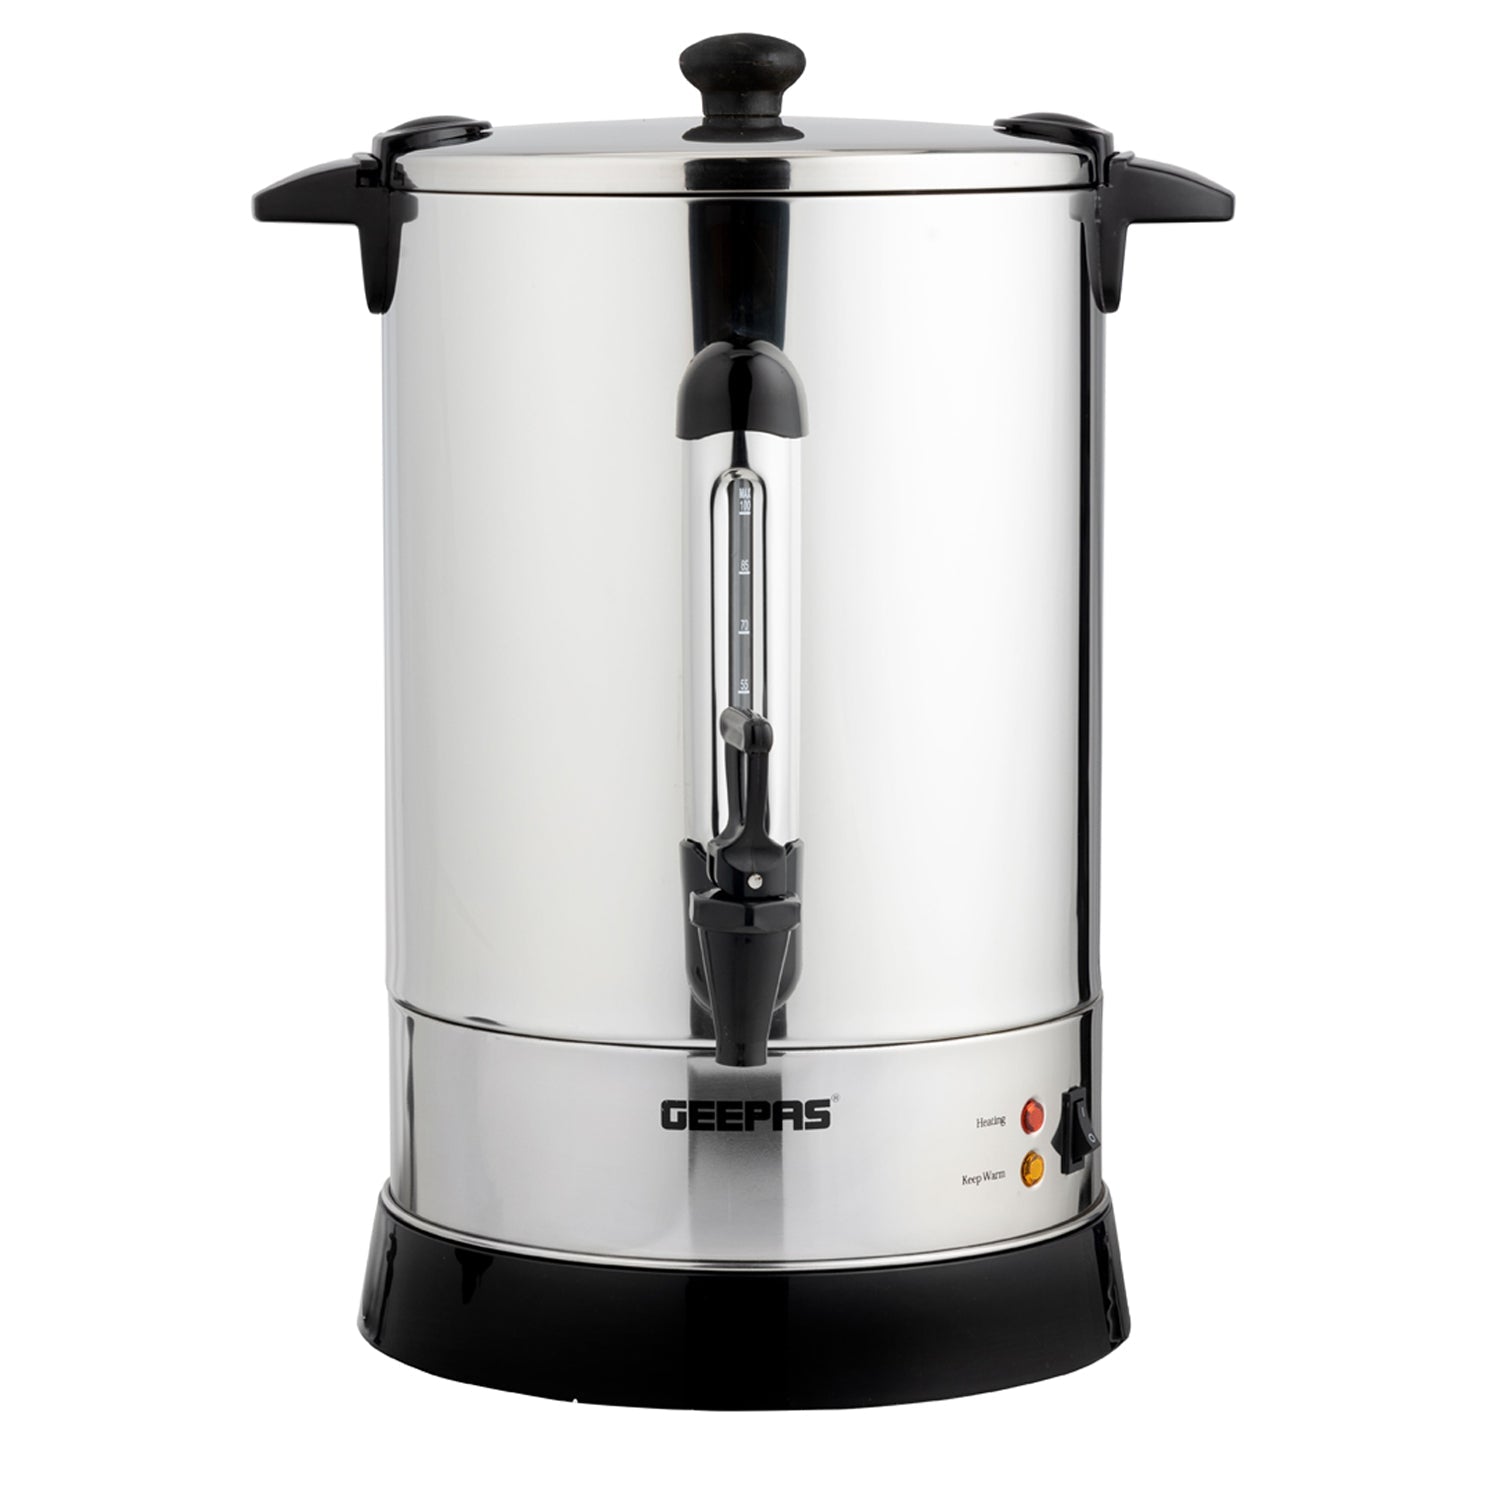 19 Litres Tea Urn, Stainless Steel